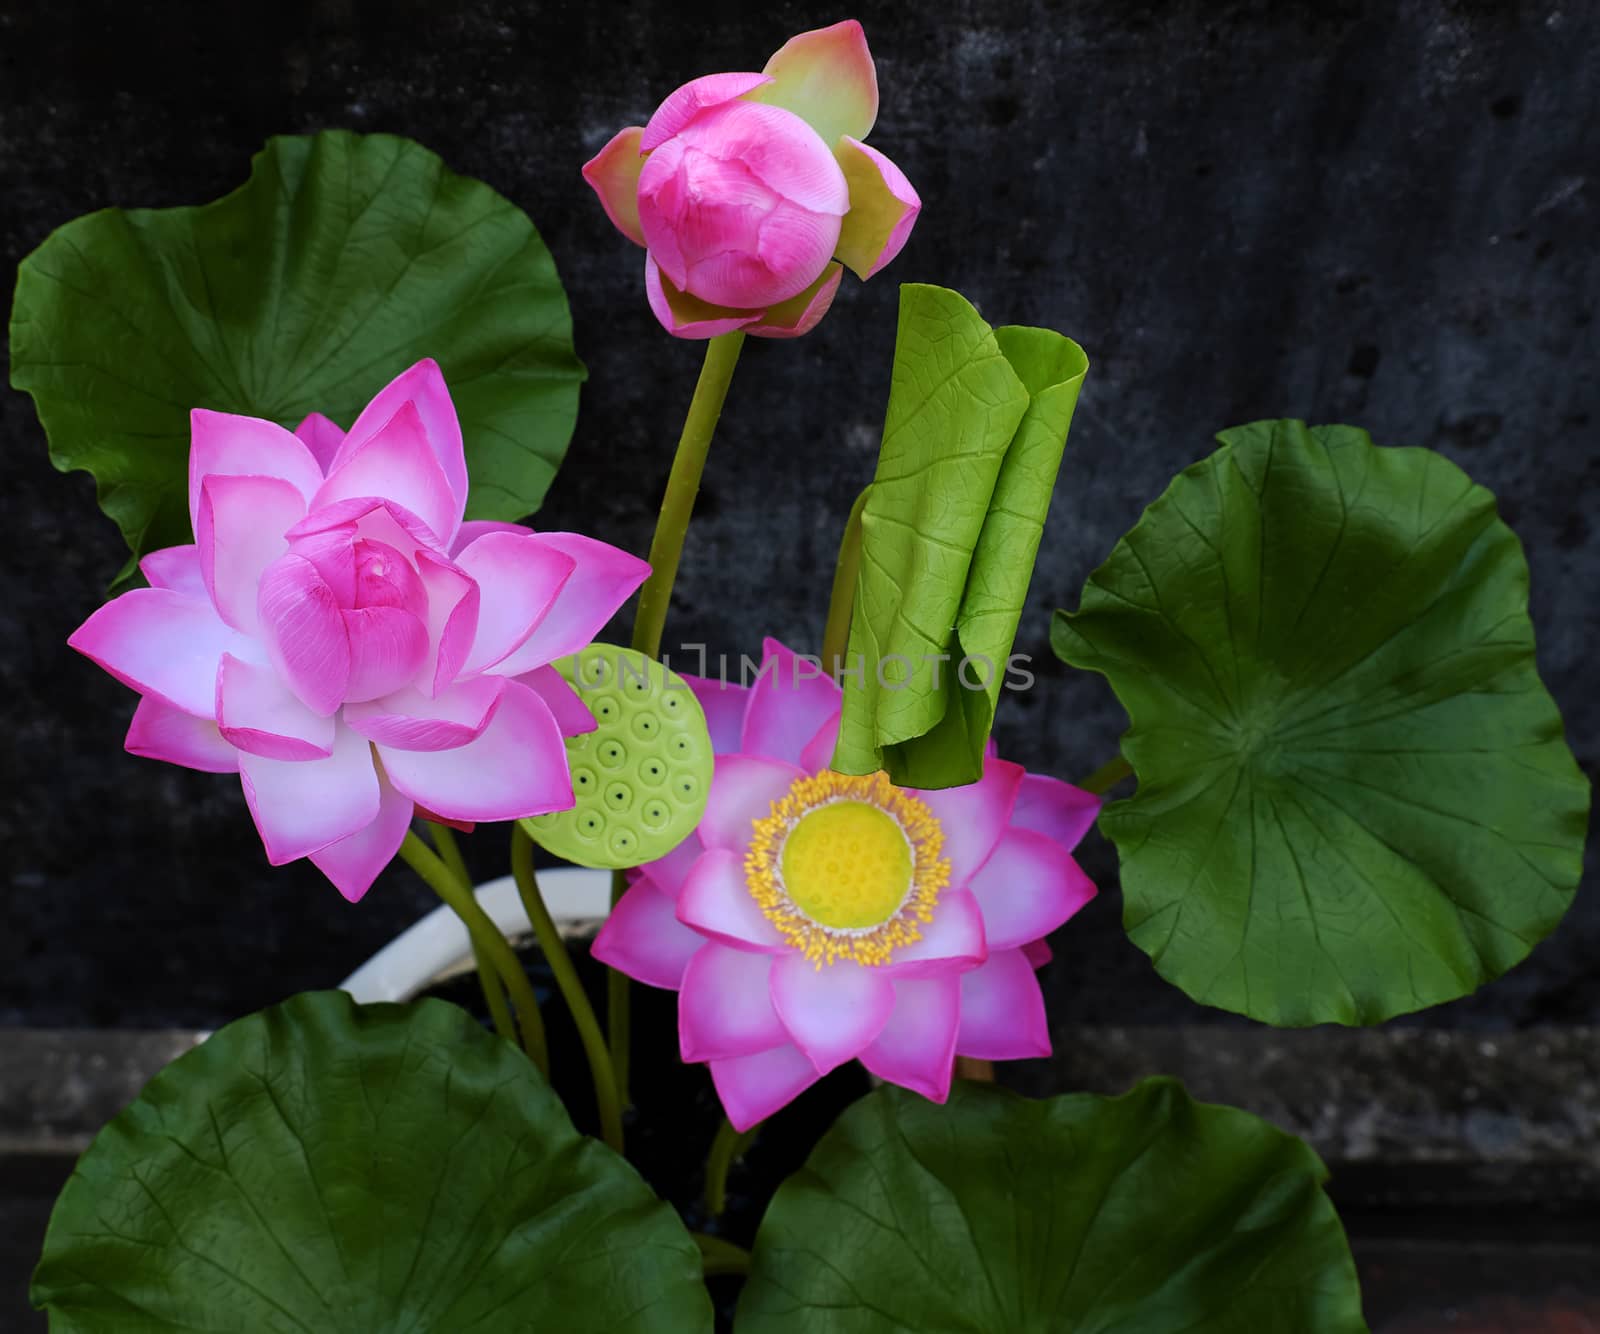 Artificial flower, handmade clay lotus flower with green leaf and pink petal, diy art product for home decoration, close up artwork on old wall background